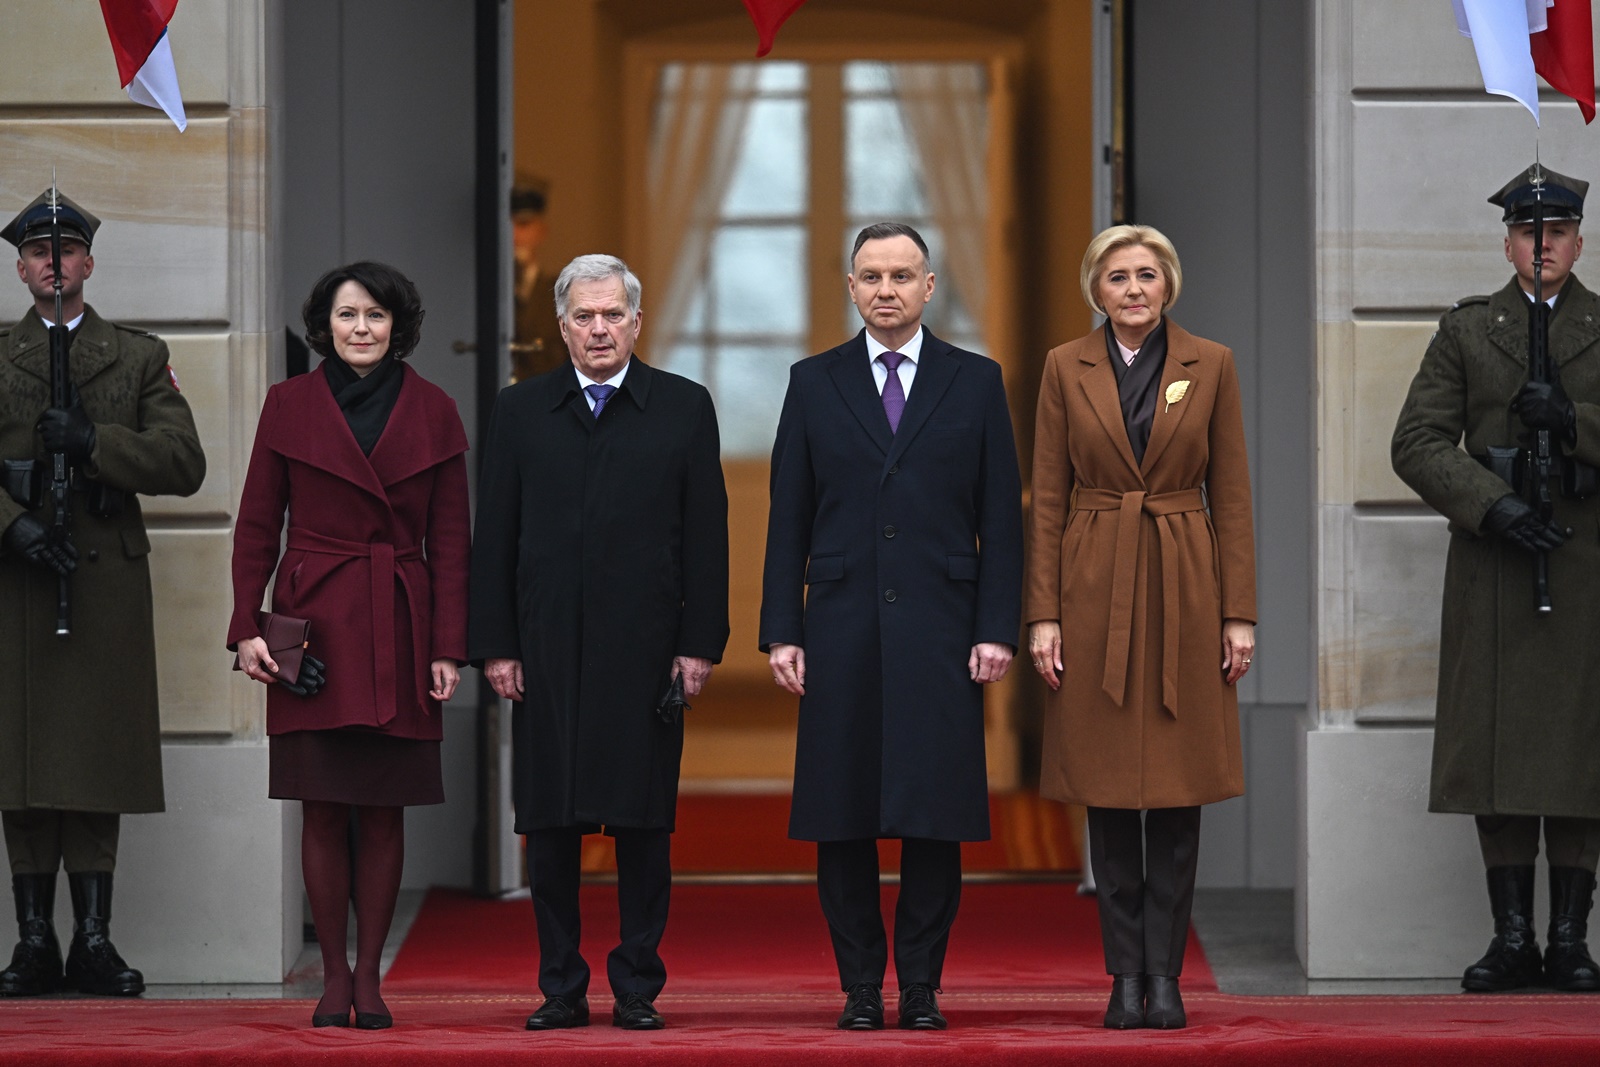 epa10985764 Visiting President of the Republic of Finland Sauli Niinisto (2-L) with his wife Jenni Haukio (L) and President of the Republic of Poland Andrzej Duda (2-R) with his wife Agata Kornhauser-Duda (R) attend the ceremonies during the official welcoming for the state guest in the courtyard of the Presidential Palace in Warsaw, Poland, 20 November 2023. The Finnish presidential couple is on a two-day visit to Poland.  EPA/Radek Pietruszka POLAND OUT